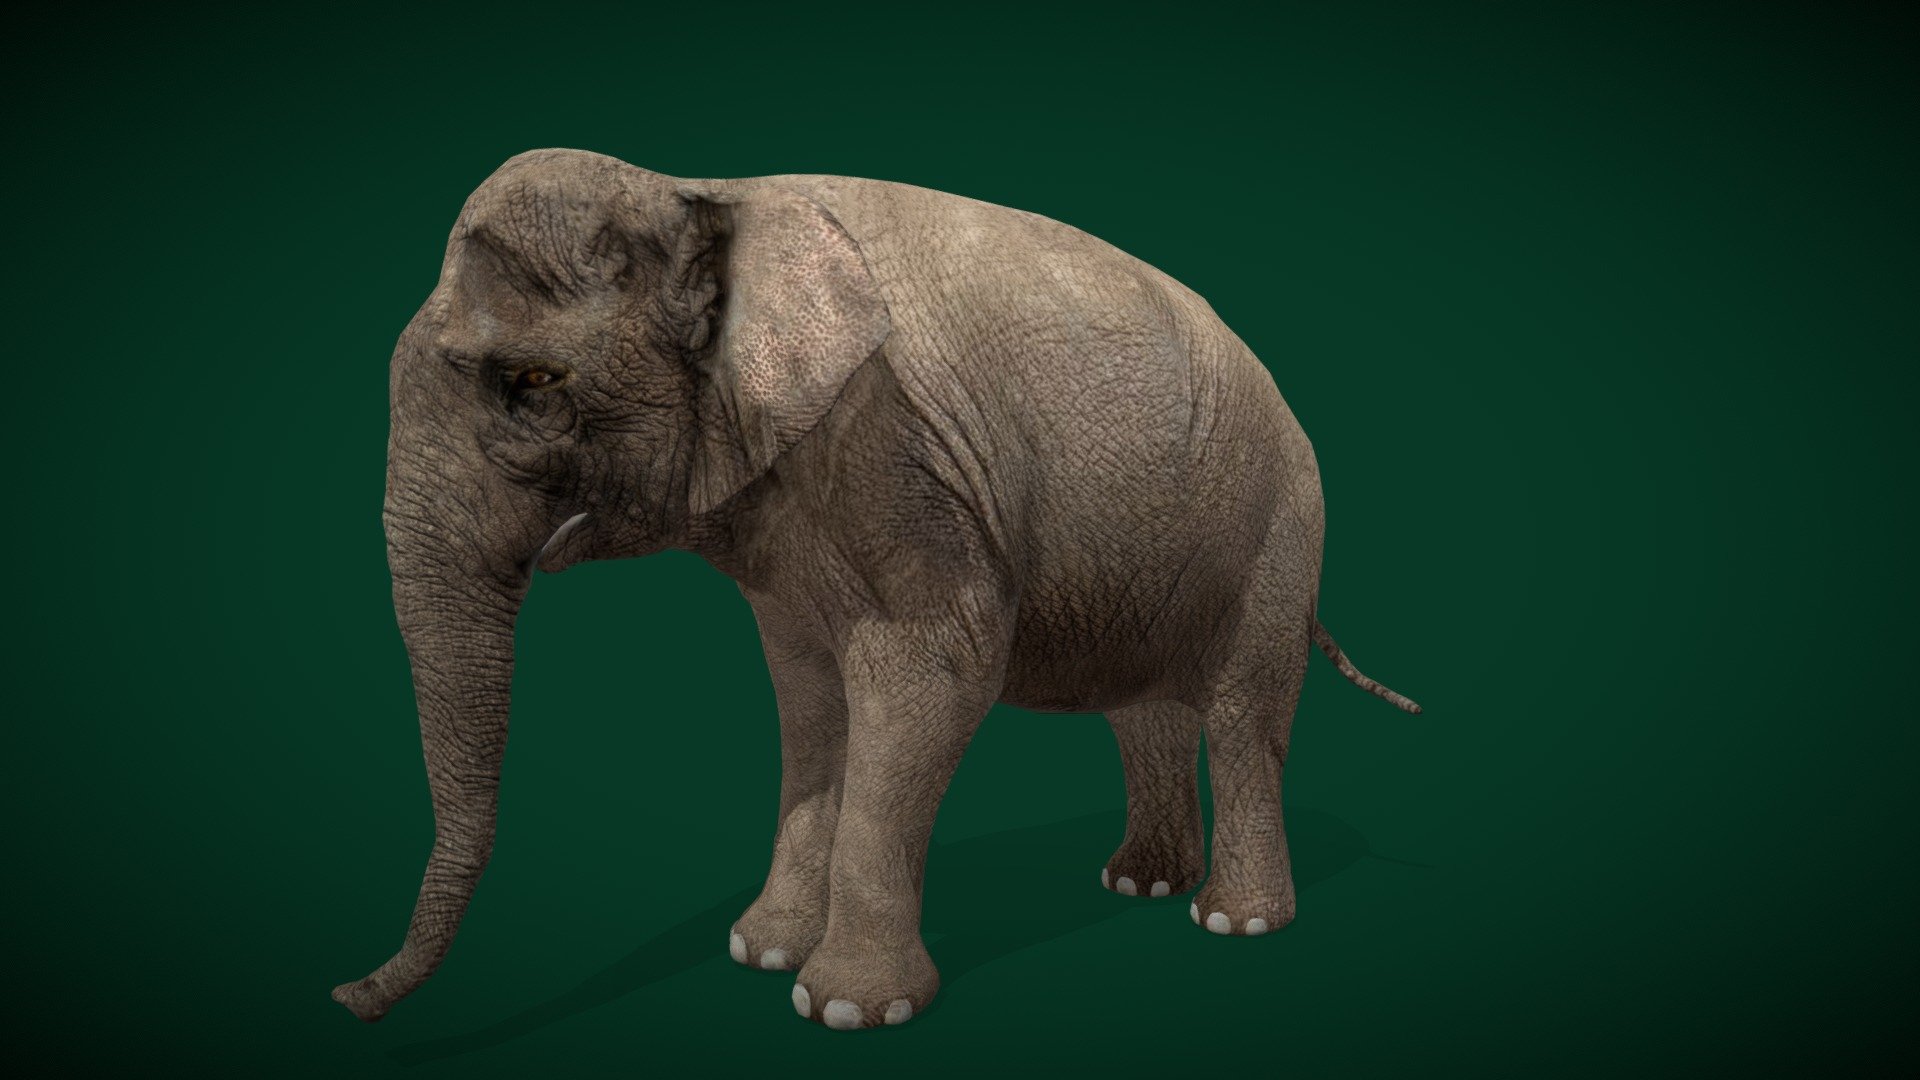 Asian Elephant Adult Unisex( Asiatic elephant )Buffalo Zoo,Endangered

Elephas maximus Animal Mammal (Indian subcontinent)largest living land animal, Herbivorous

1 Draw Calls

Lowpoly

Game Ready Asset

Subdivision Surface Ready

11- Animations

4K PBR Textures Material

Unreal FBX (Unreal 4,5 Plus)

Unity FBX

Blend File 3.6.5 LTS

USDZ File (AR Ready). Real Scale Dimension (Xcode ,Reality Composer, Keynote Ready)

Textures Files

GLB File (Unreal 5.1 Plus Native Support)


Gltf File ( Spark AR, Lens Studio(SnapChat) , Effector(Tiktok) , Spline, Play Canvas,Omiverse ) Compatible




Triangles -11230  



Faces -6399

Edges -12140

Vertices -5759

Diffuse, Metallic, Roughness , Normal Map ,Specular Map,AO,

The Asian elephant, also known as the Asiatic elephant, is the only living species of the genus Elephas and is distributed throughout the Indian subcontinent and Southeast Asia, from India in the west, Nepal in the north, Sumatra in the south, and to Borneo in the east 3d model